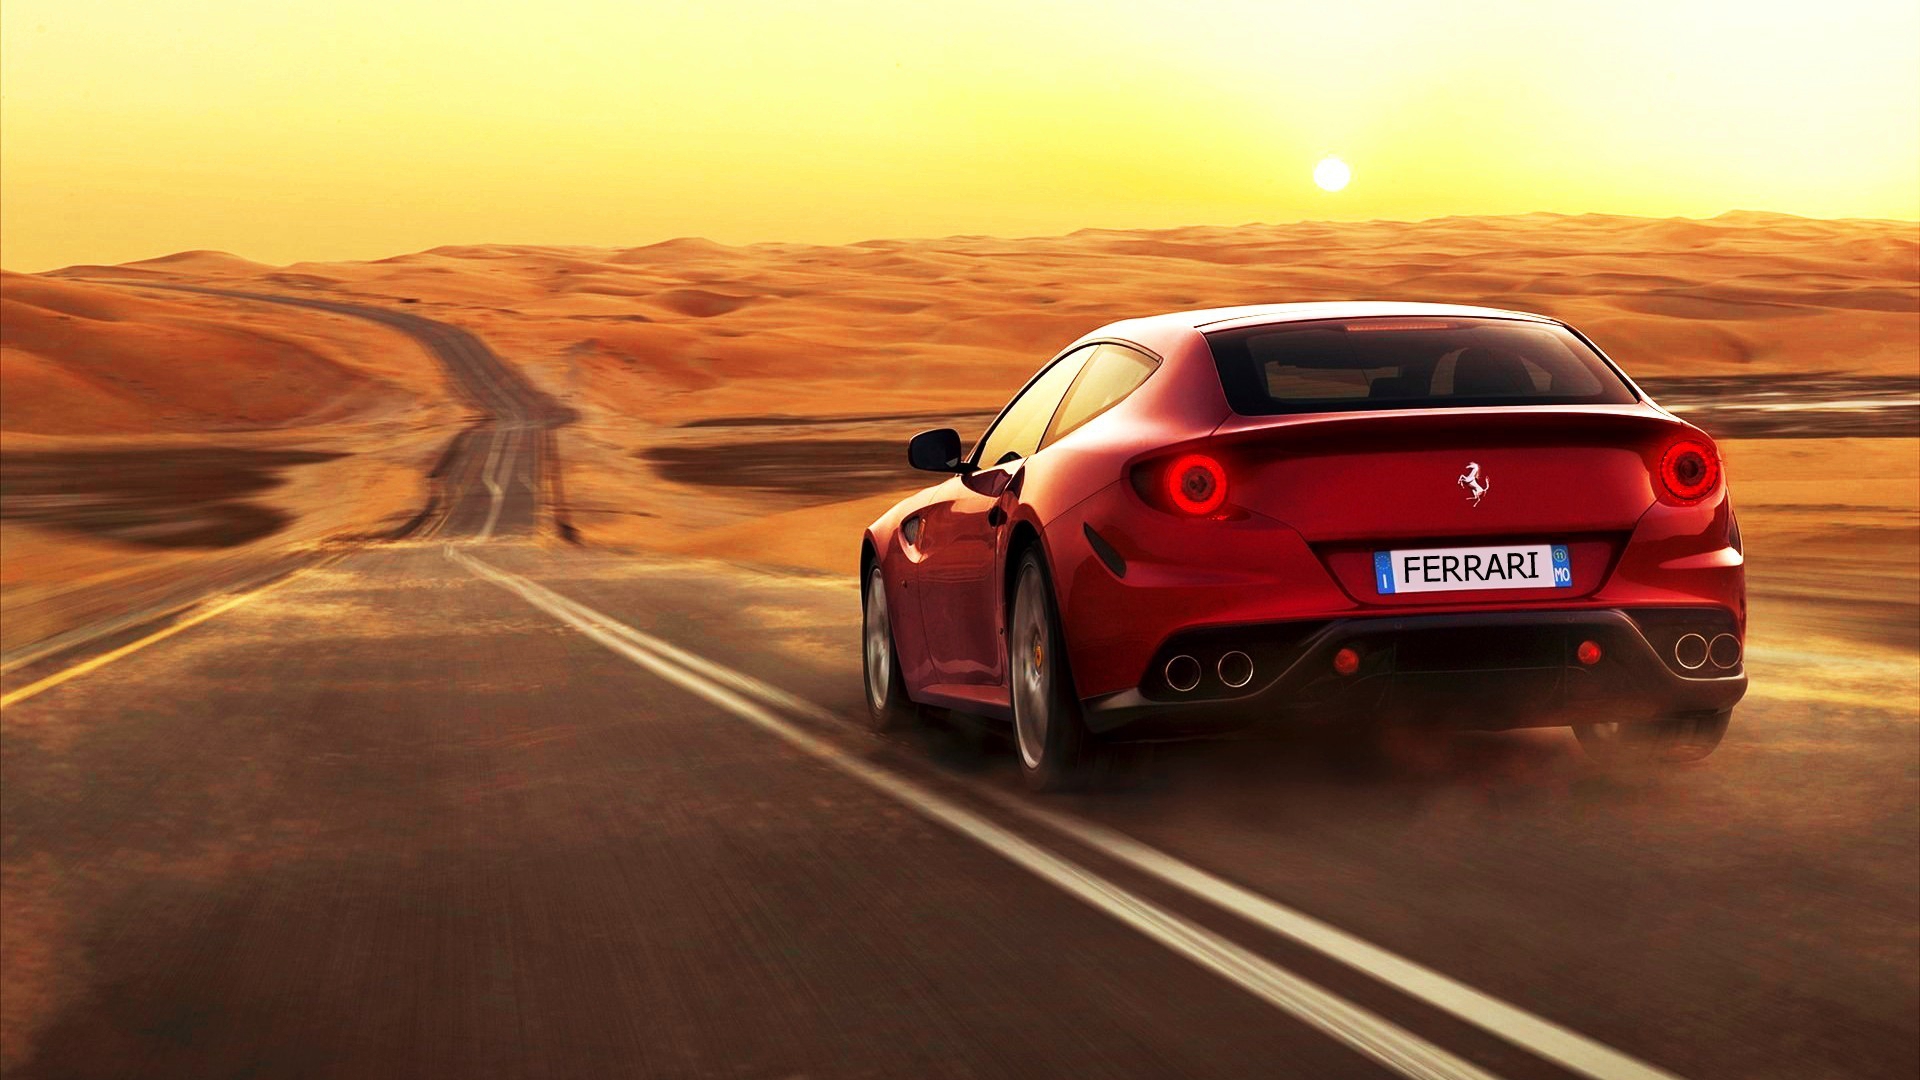 Coolest Collection of Ferrari Wallpaper & Backgrounds In HD